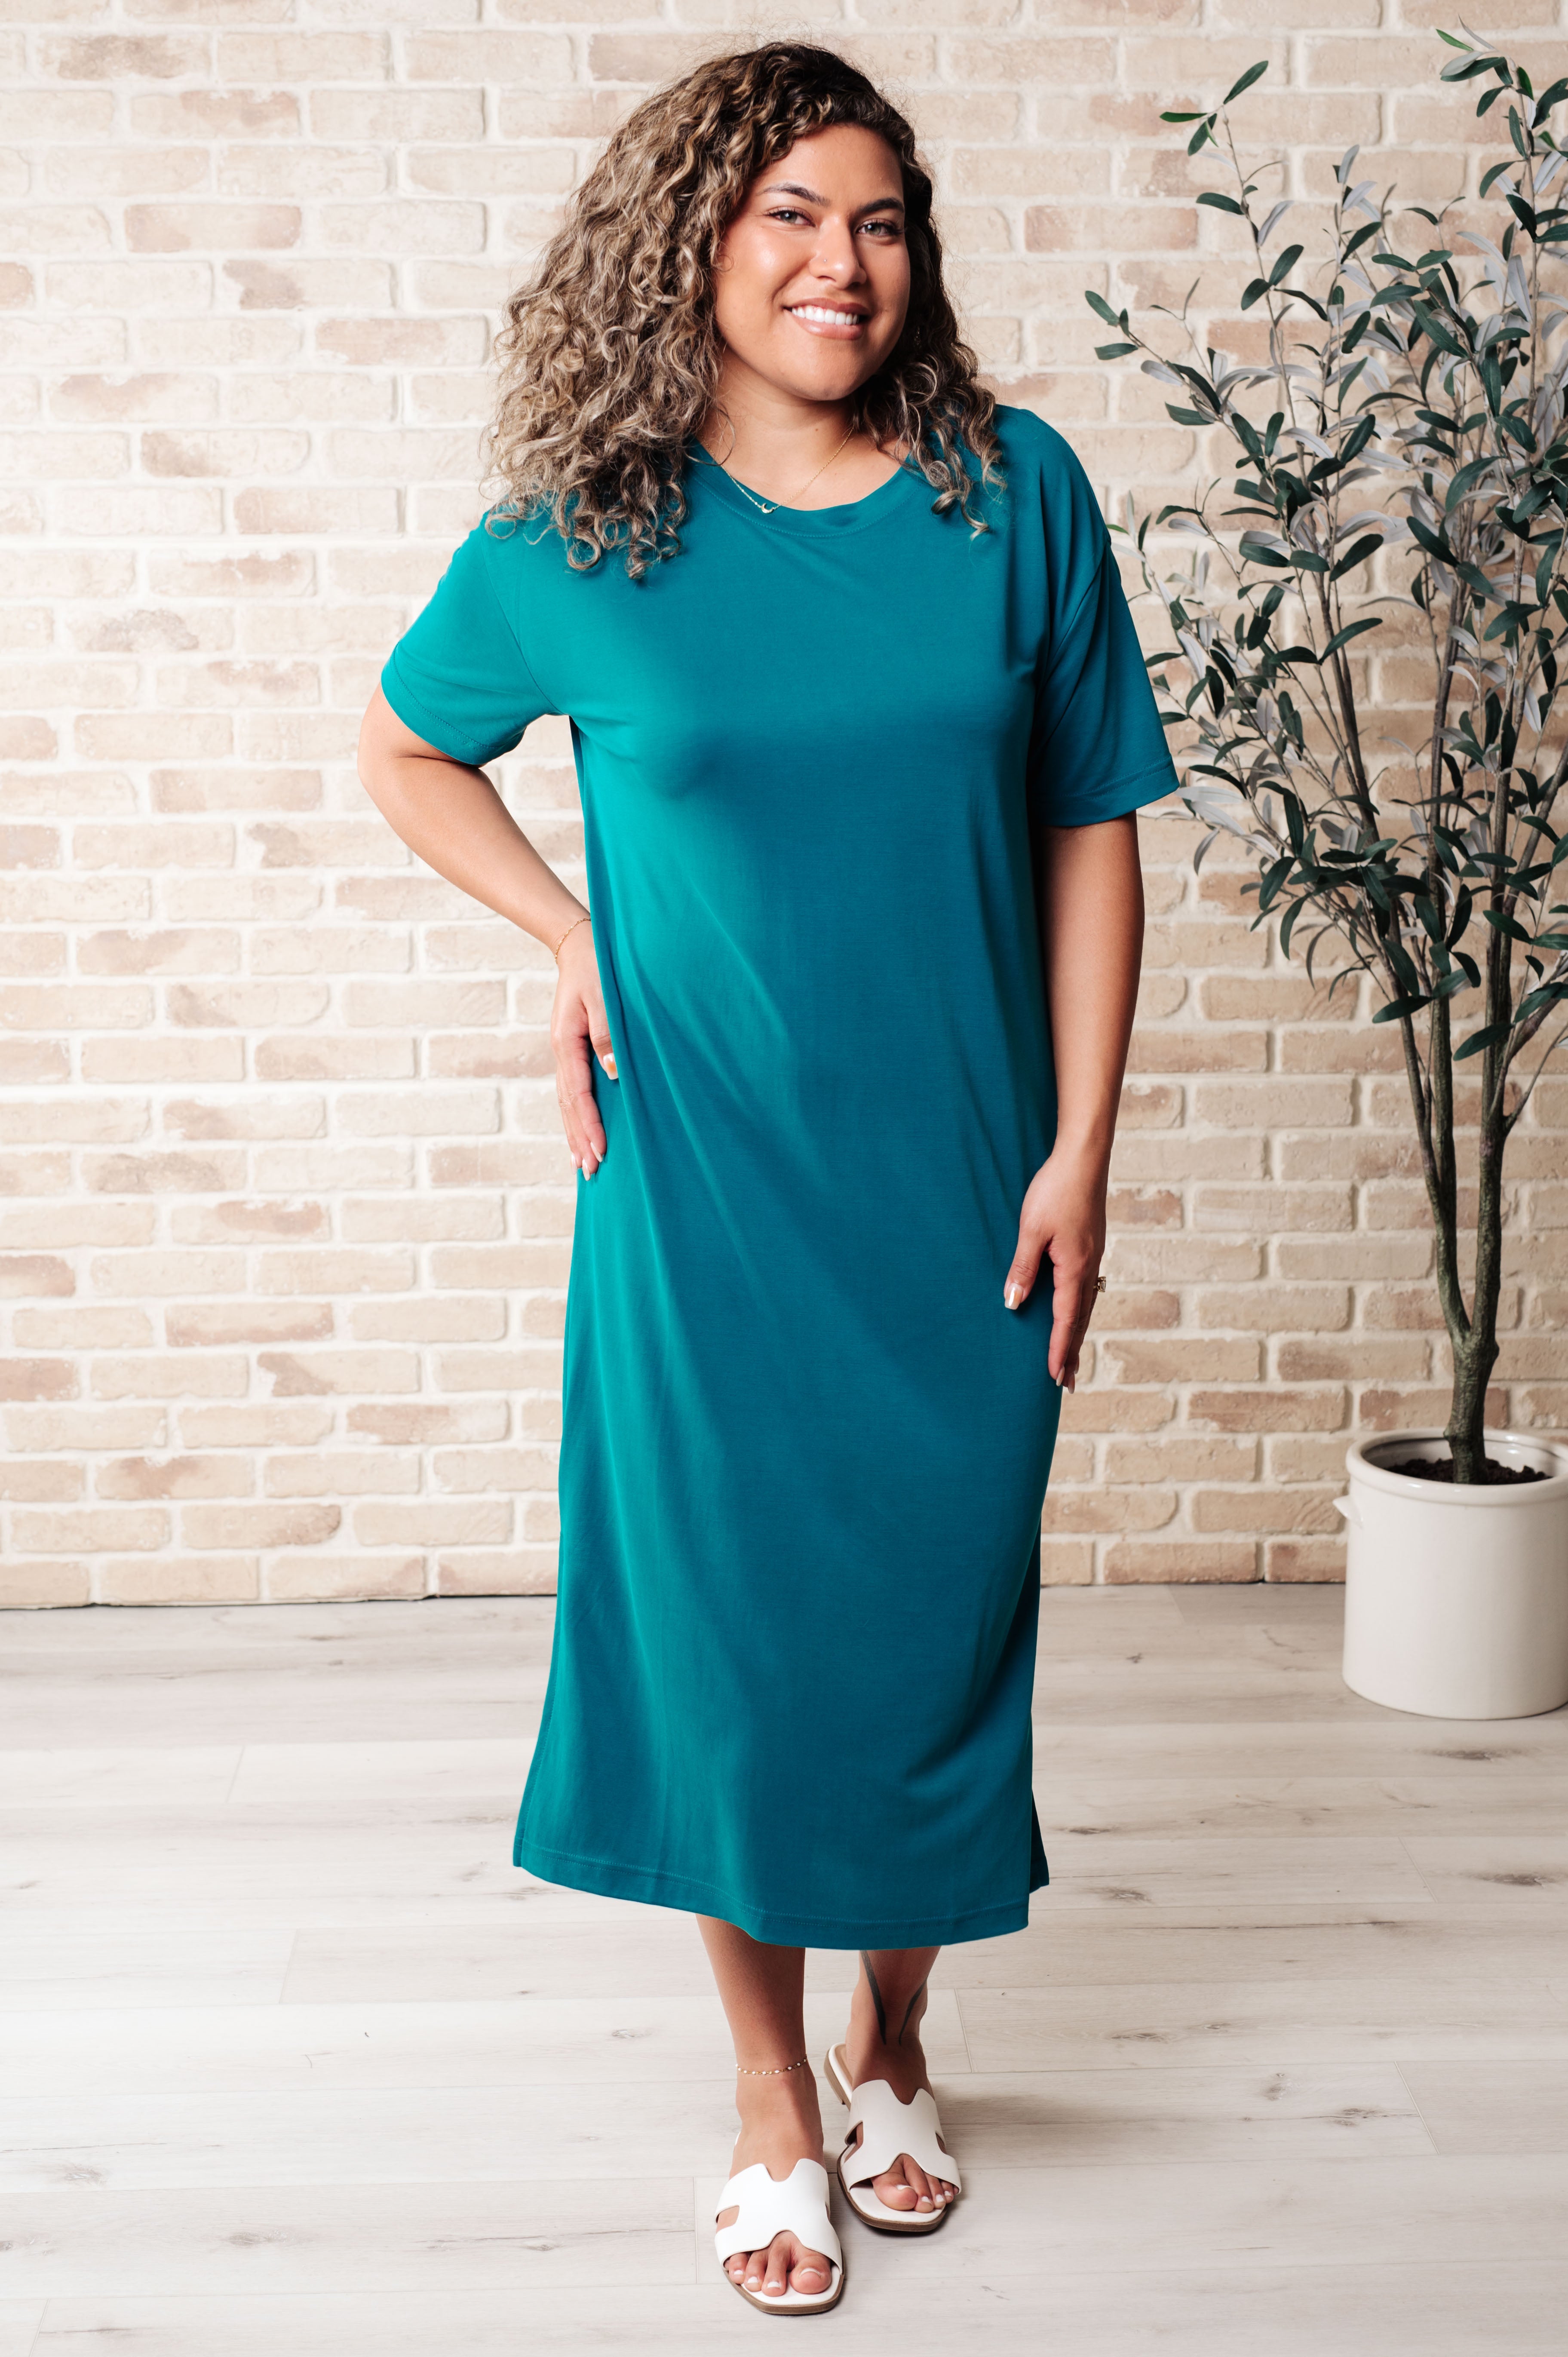 Keeping It Chill Drop Shoulder Maxi Dress in Teal Dresses Ave Shops   